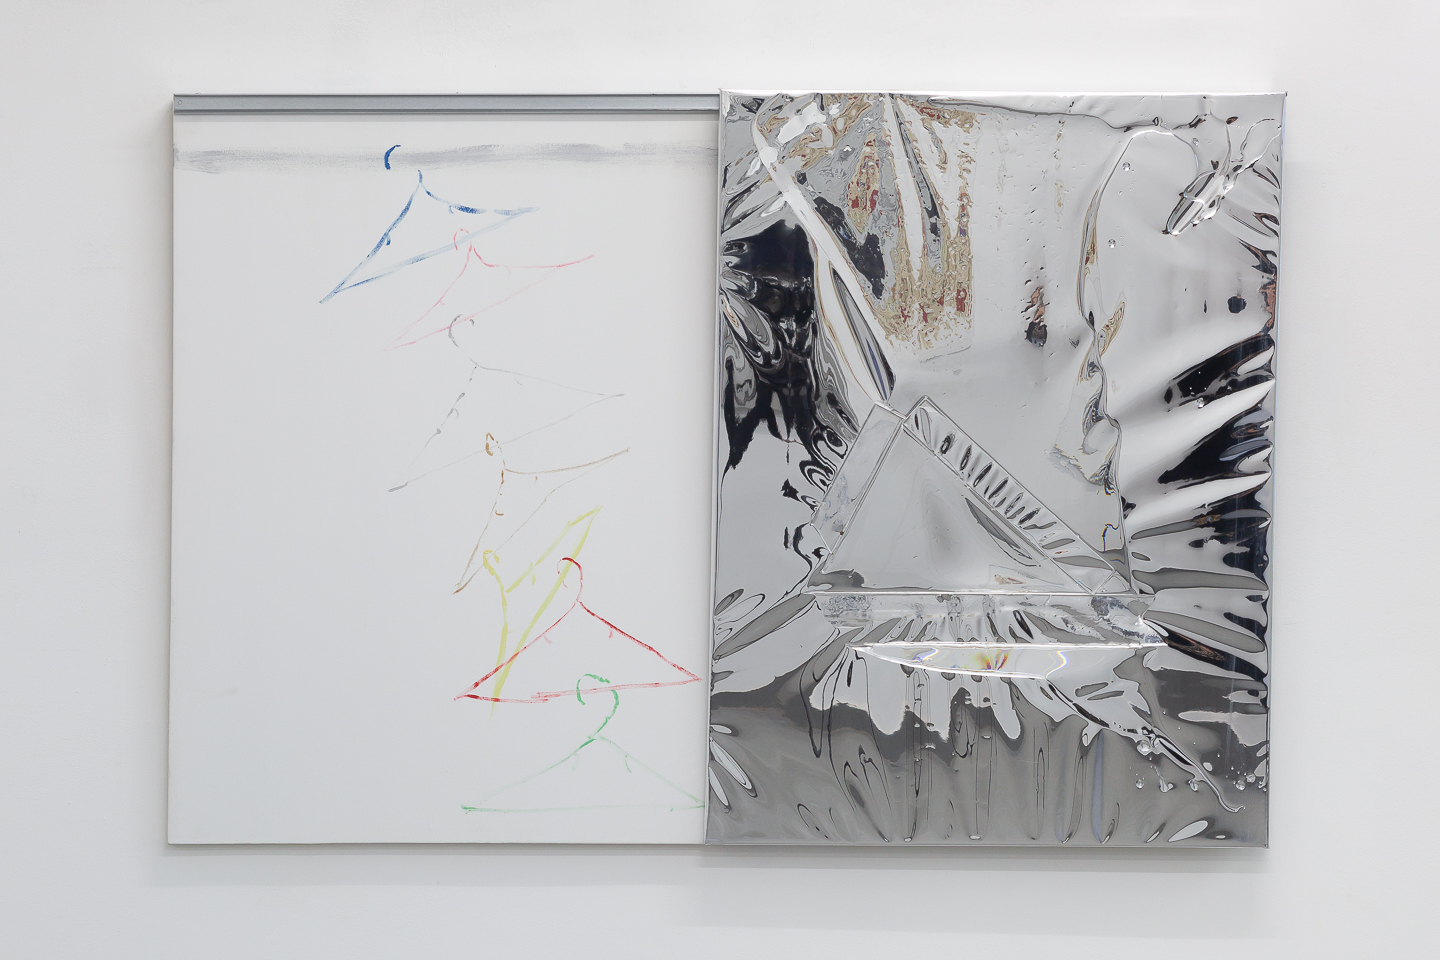 Myles Starr, The Longest Day, 2022, Oil on canvas, mylar, resin, steel track and hardware, 101.6 x 152.4 cm